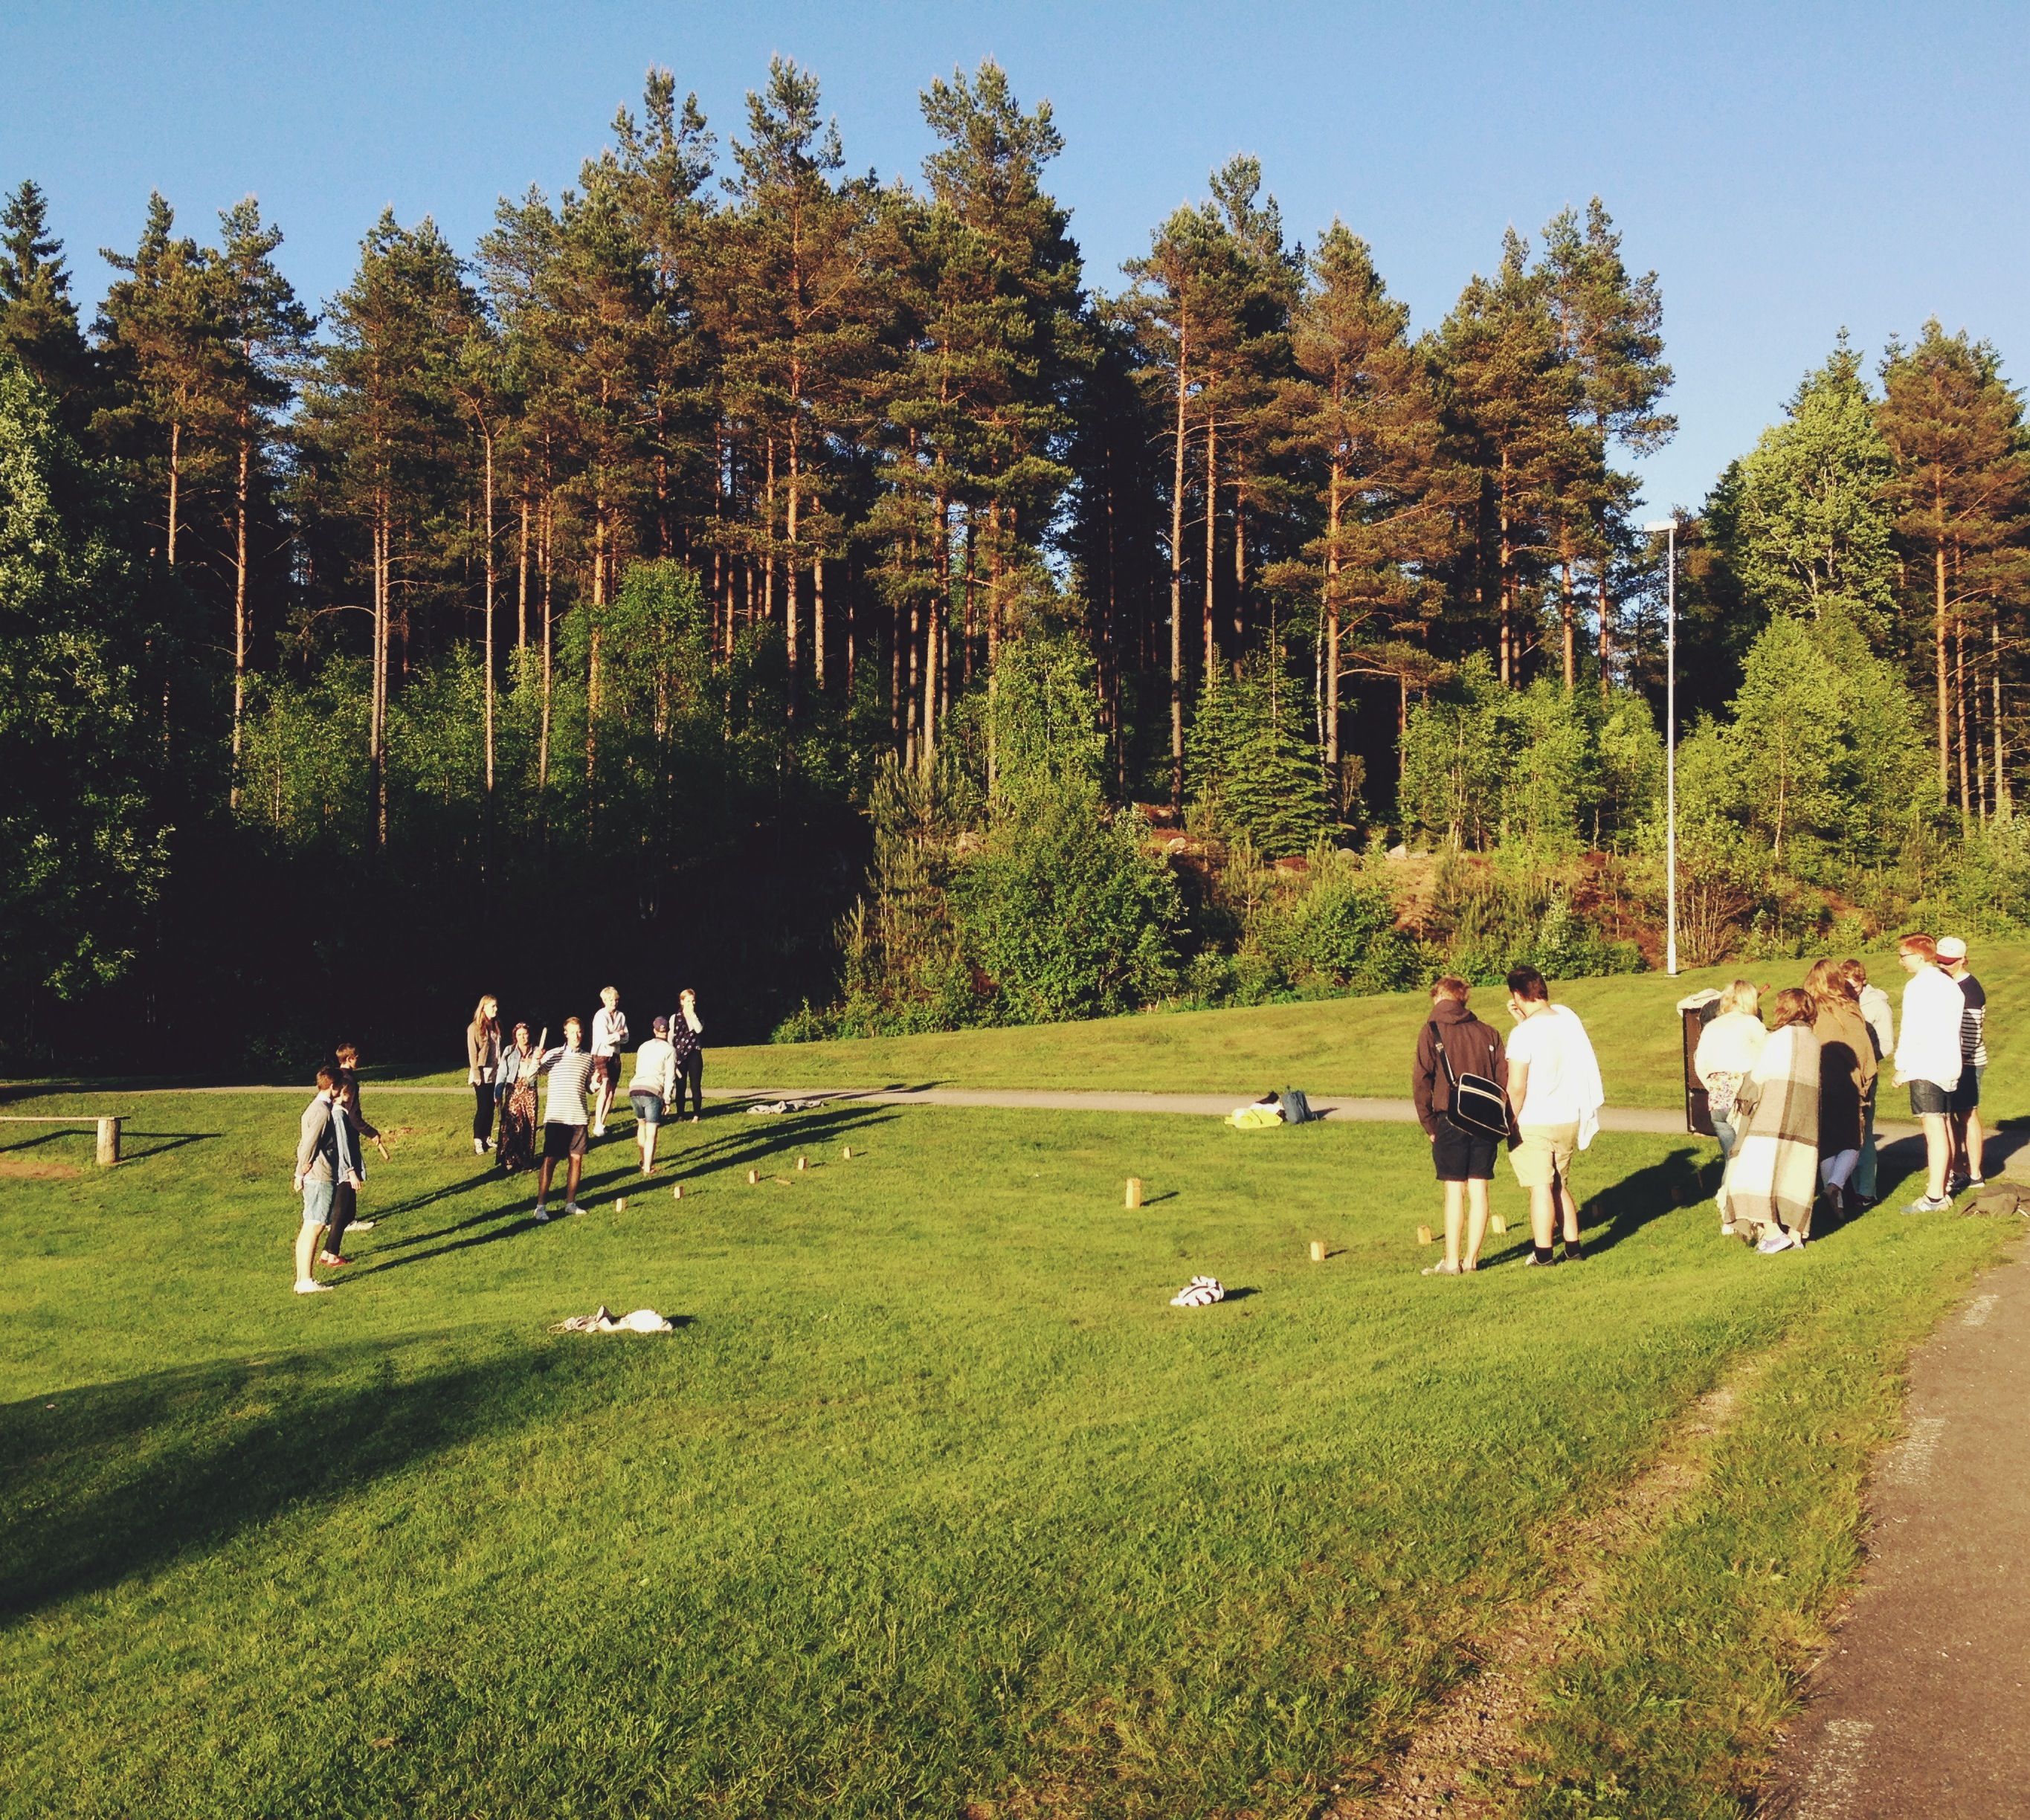 No swedish summer night is complete without an old traditional game ...